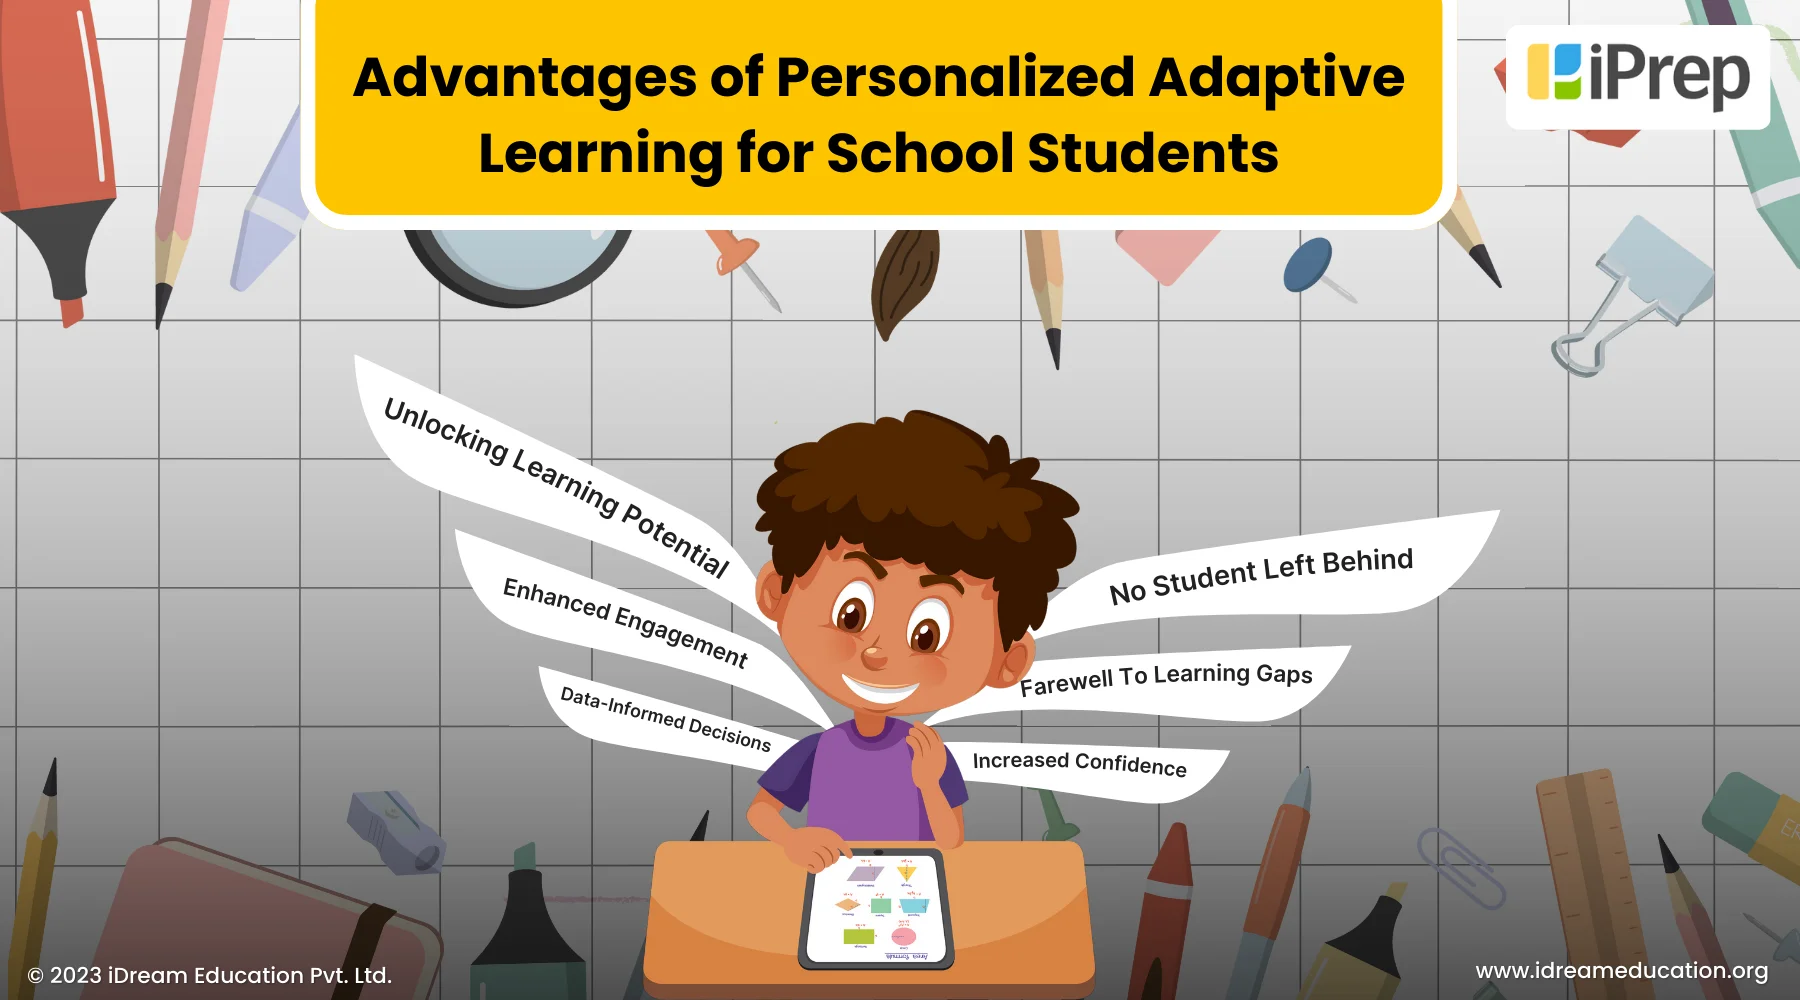 A visual of a learner witnessing the Advantages Of Personalized Adaptive Learning For School Students